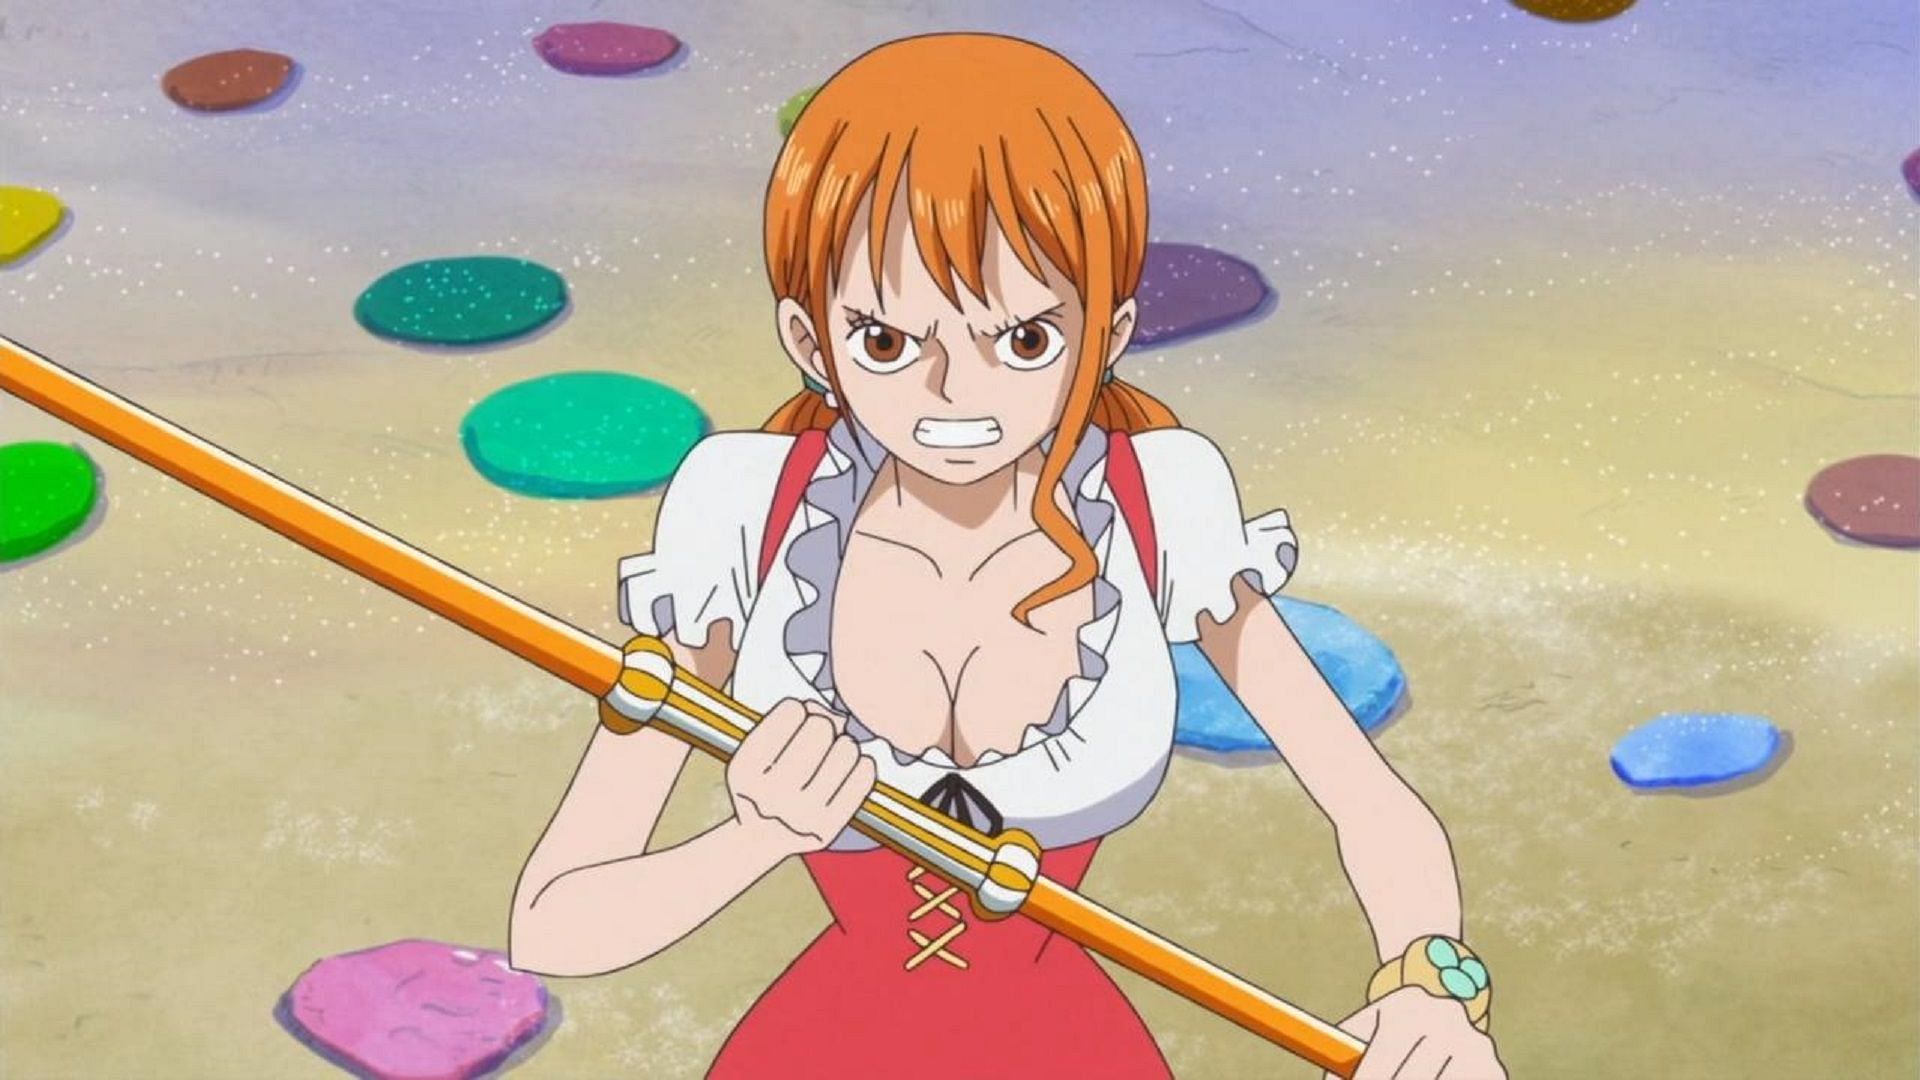 Nami in her Whole Cake Island outfit (Image via Toei Animation, One Piece)